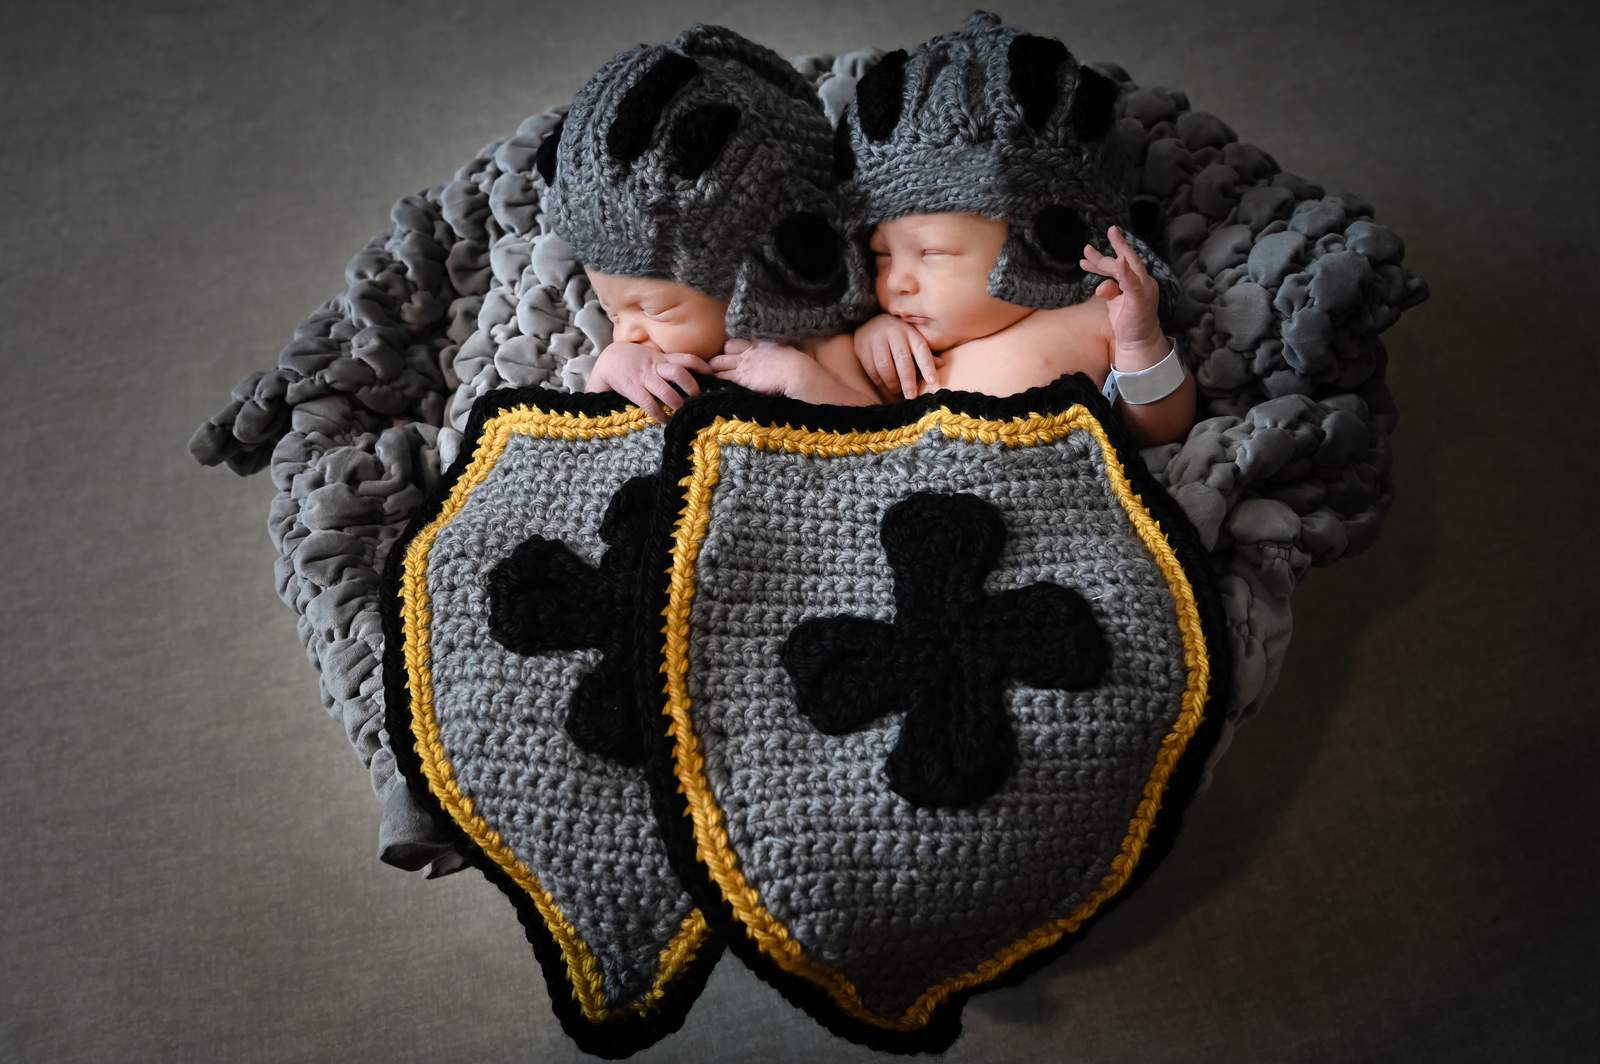 Twins are first babies born at UCF Lake Nona Medical Center